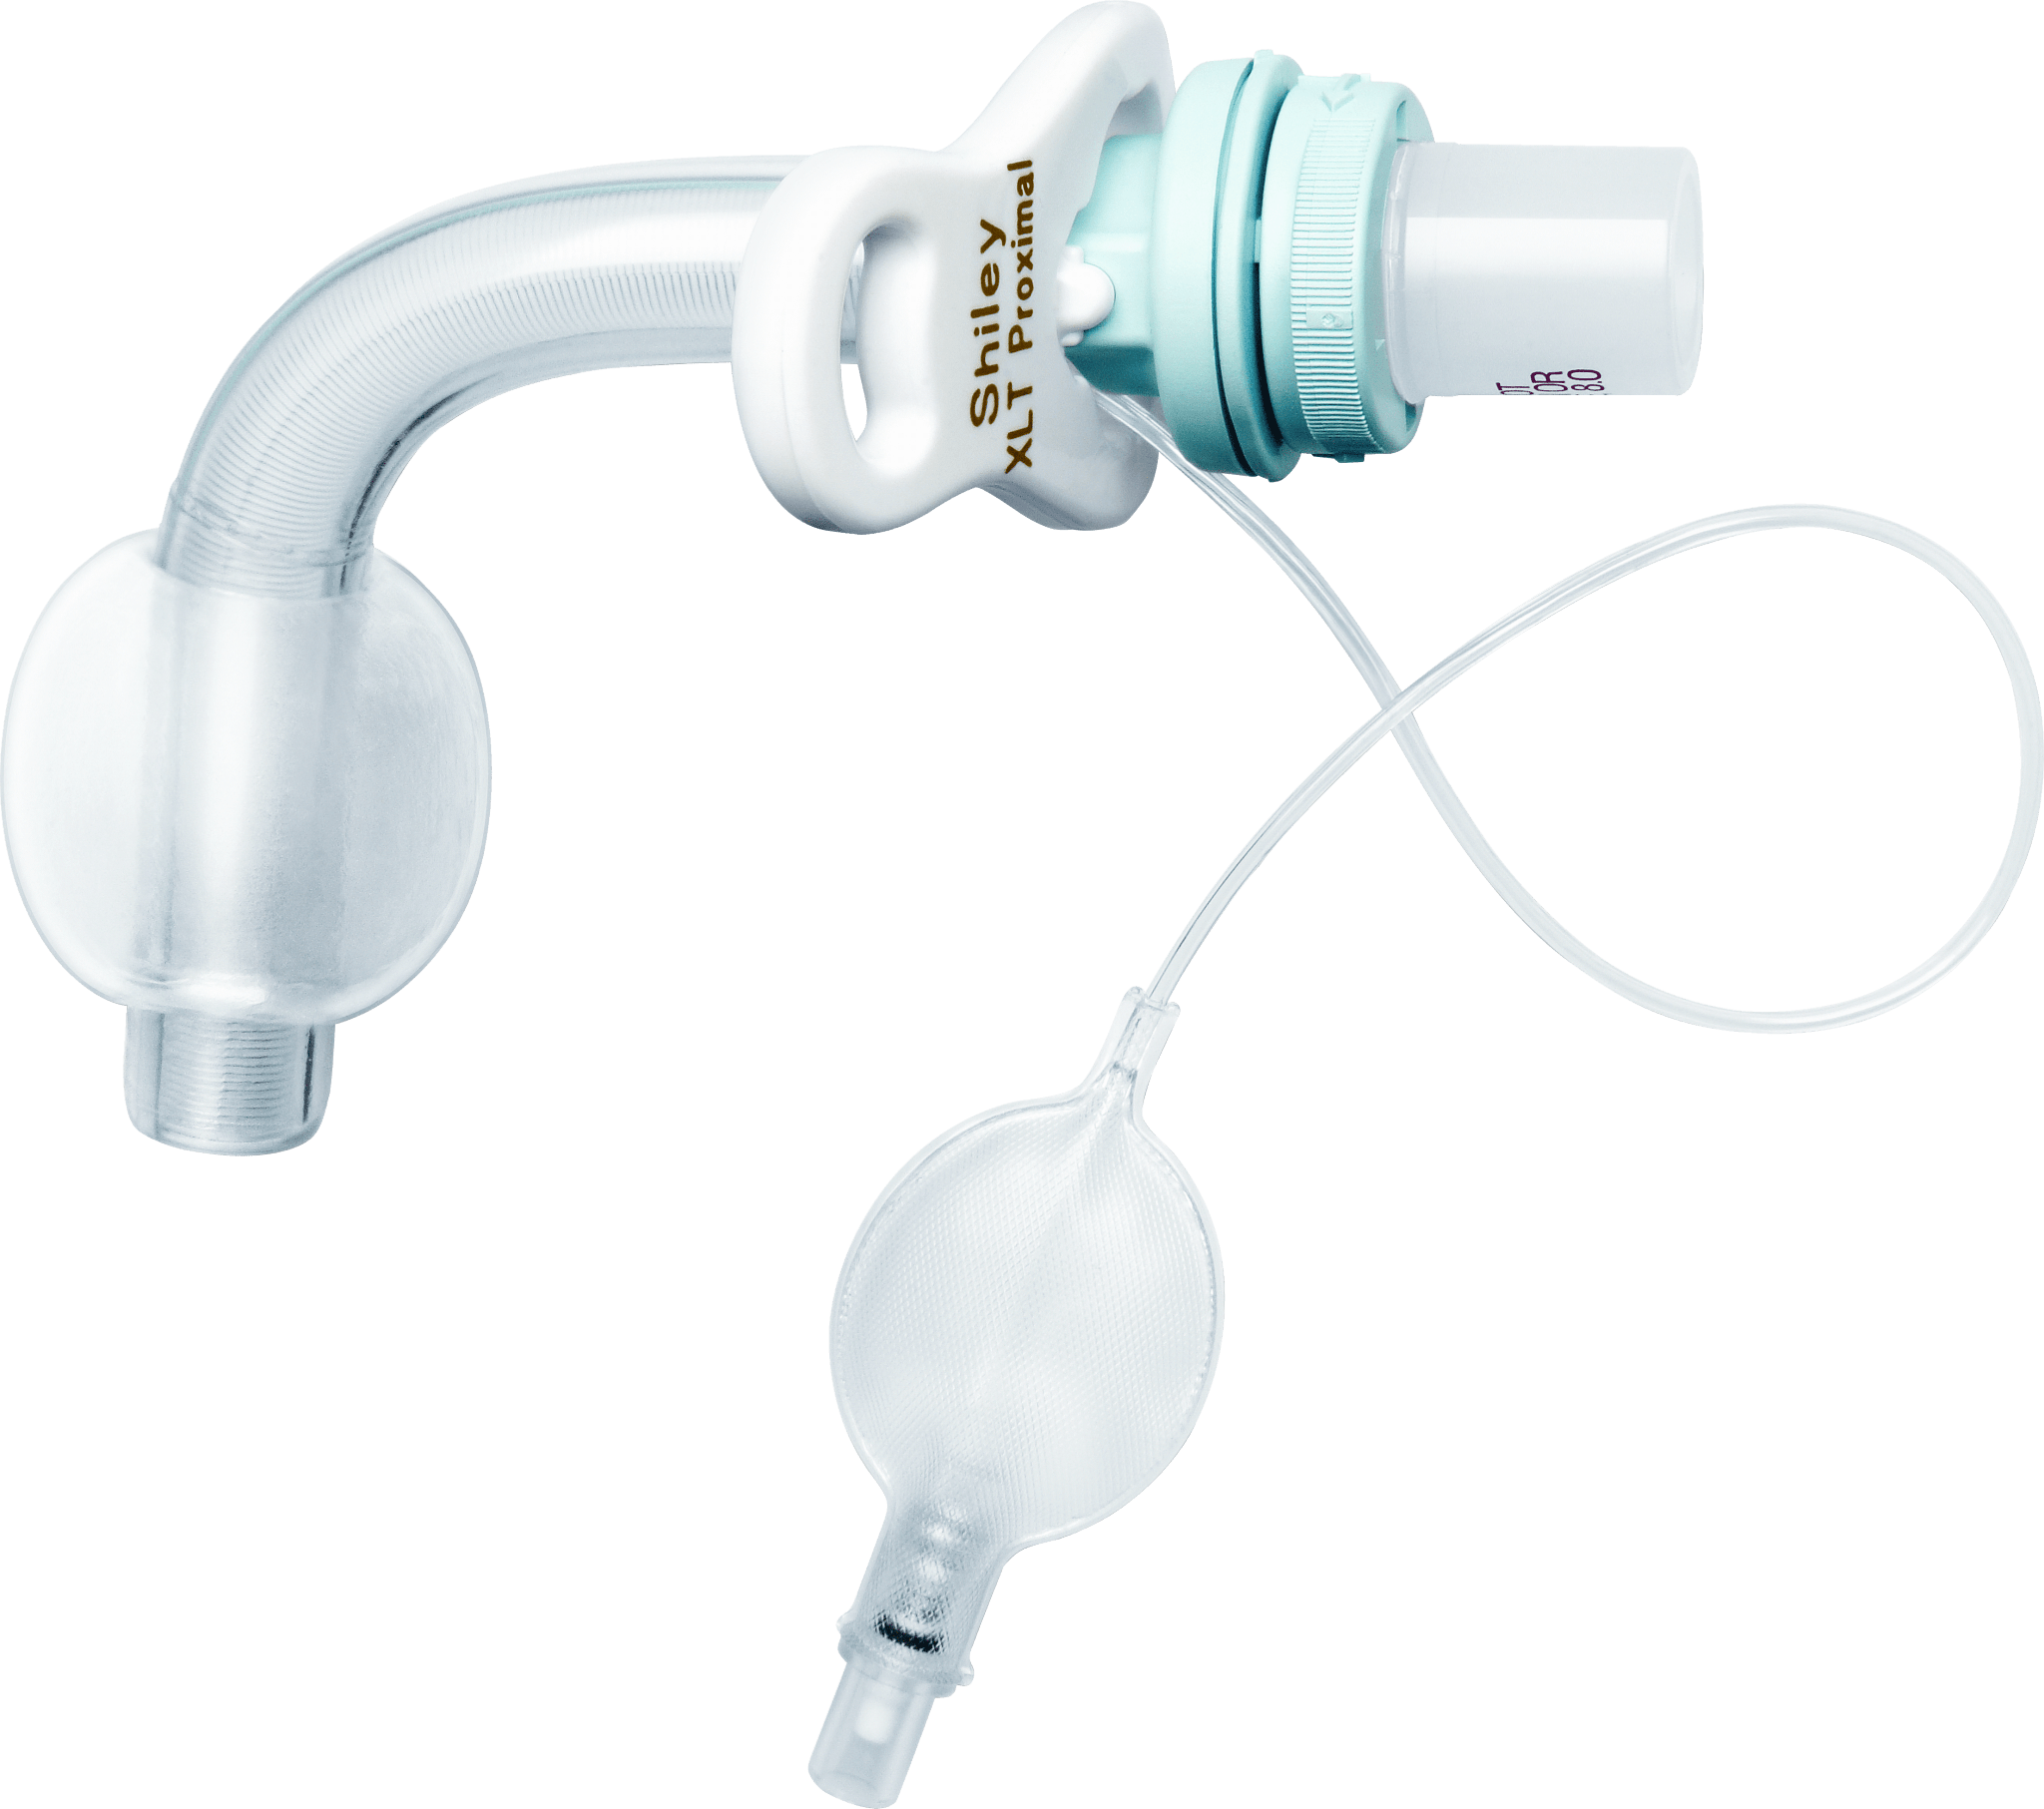 EA/1 - Mallinckrodt Medical Inc Shiley&trade; XLT Extended-Length Cuffed Tracheostomy Tube 95mm L, 6mm I.D. x 11mm O.D., Proximal Extension, White Flange - Best Buy Medical Supplies